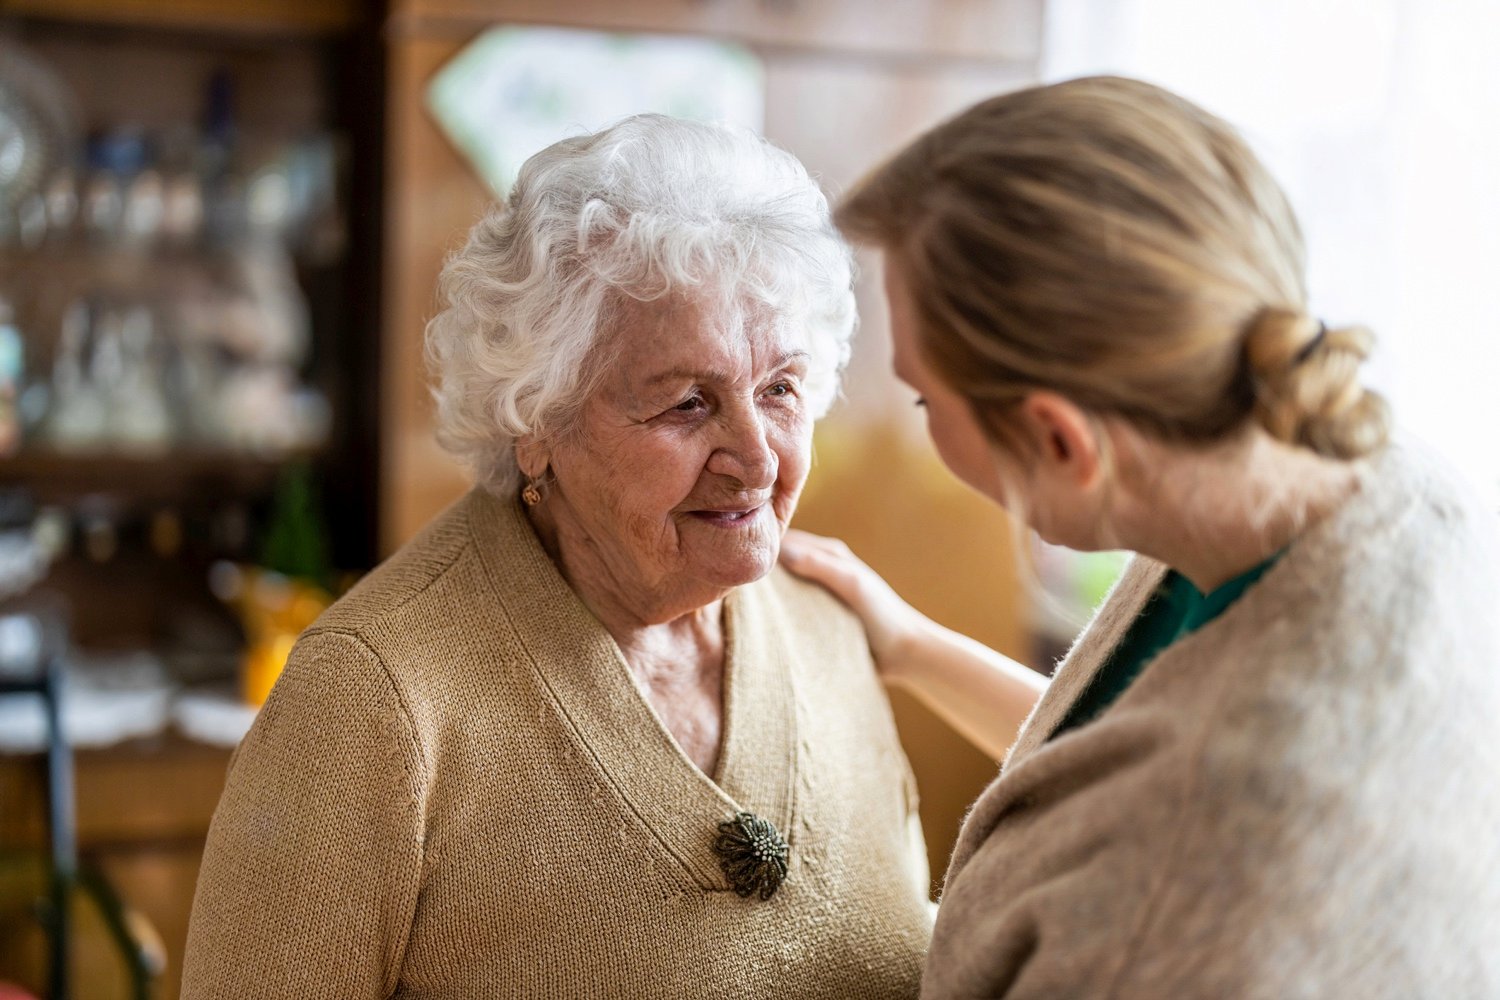 Health visitor talking to a senior woman during home visit-1307432596